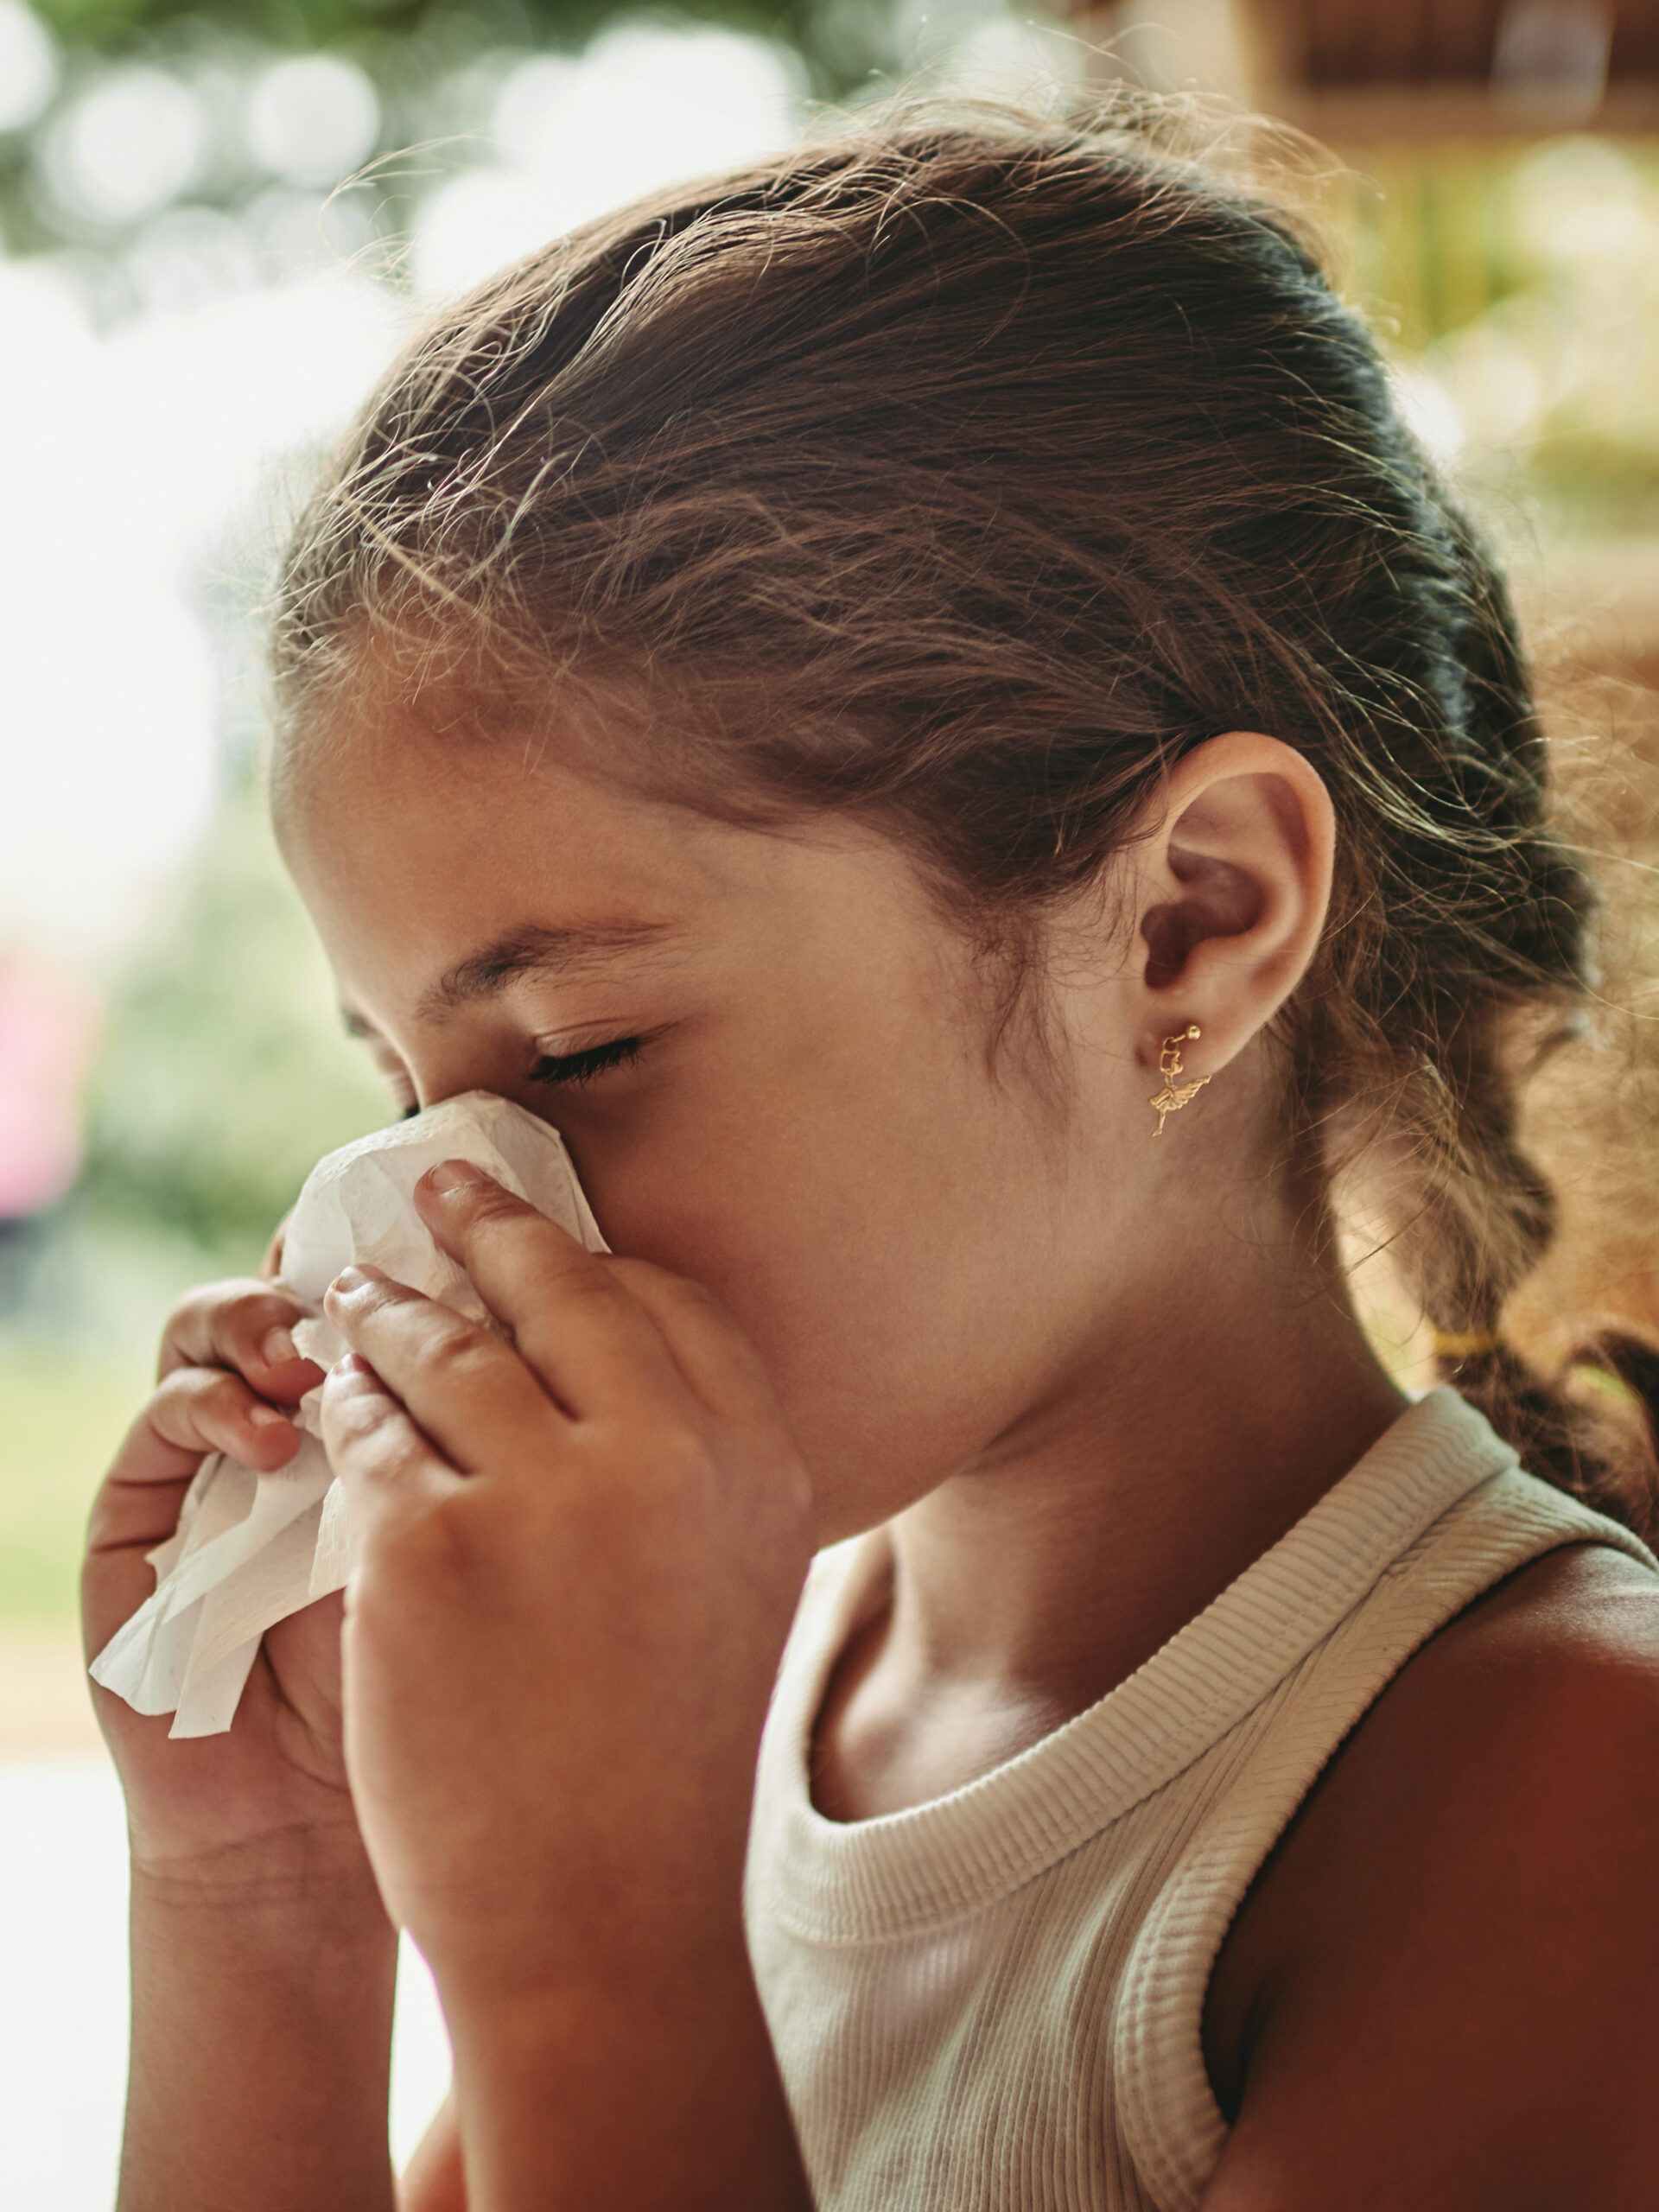 An ultimate guide to avoiding indoor triggers for kids with asthma and allergies